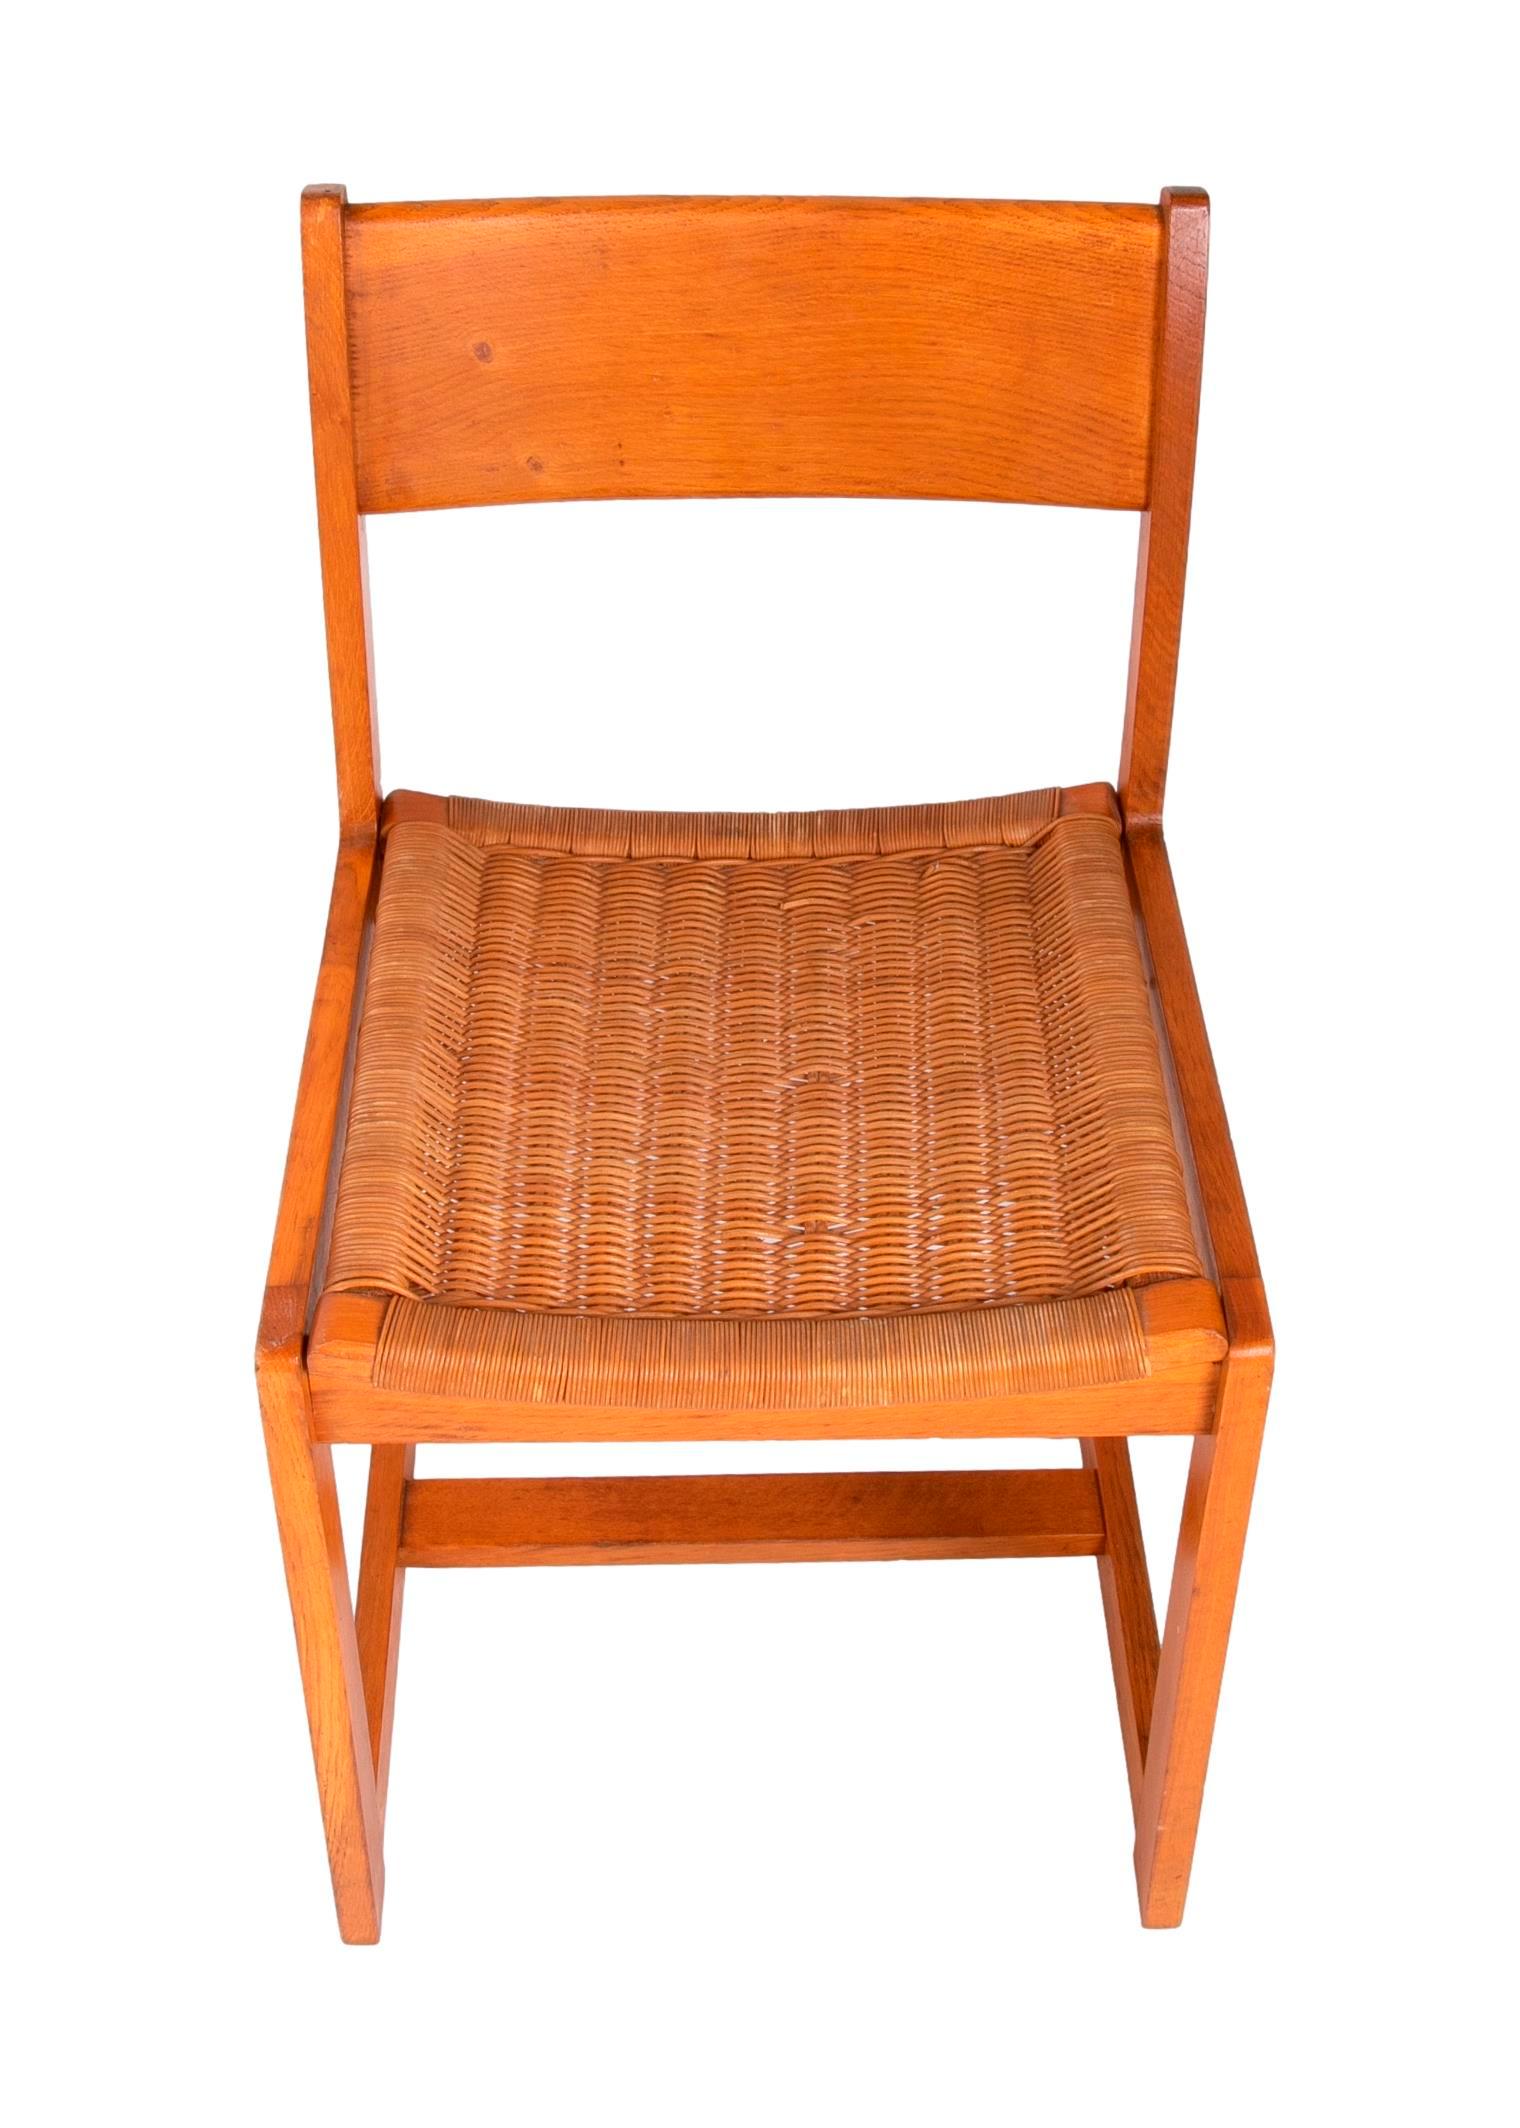 1970s Spanish Set of Four Wooden and Wicker Chairs  For Sale 7